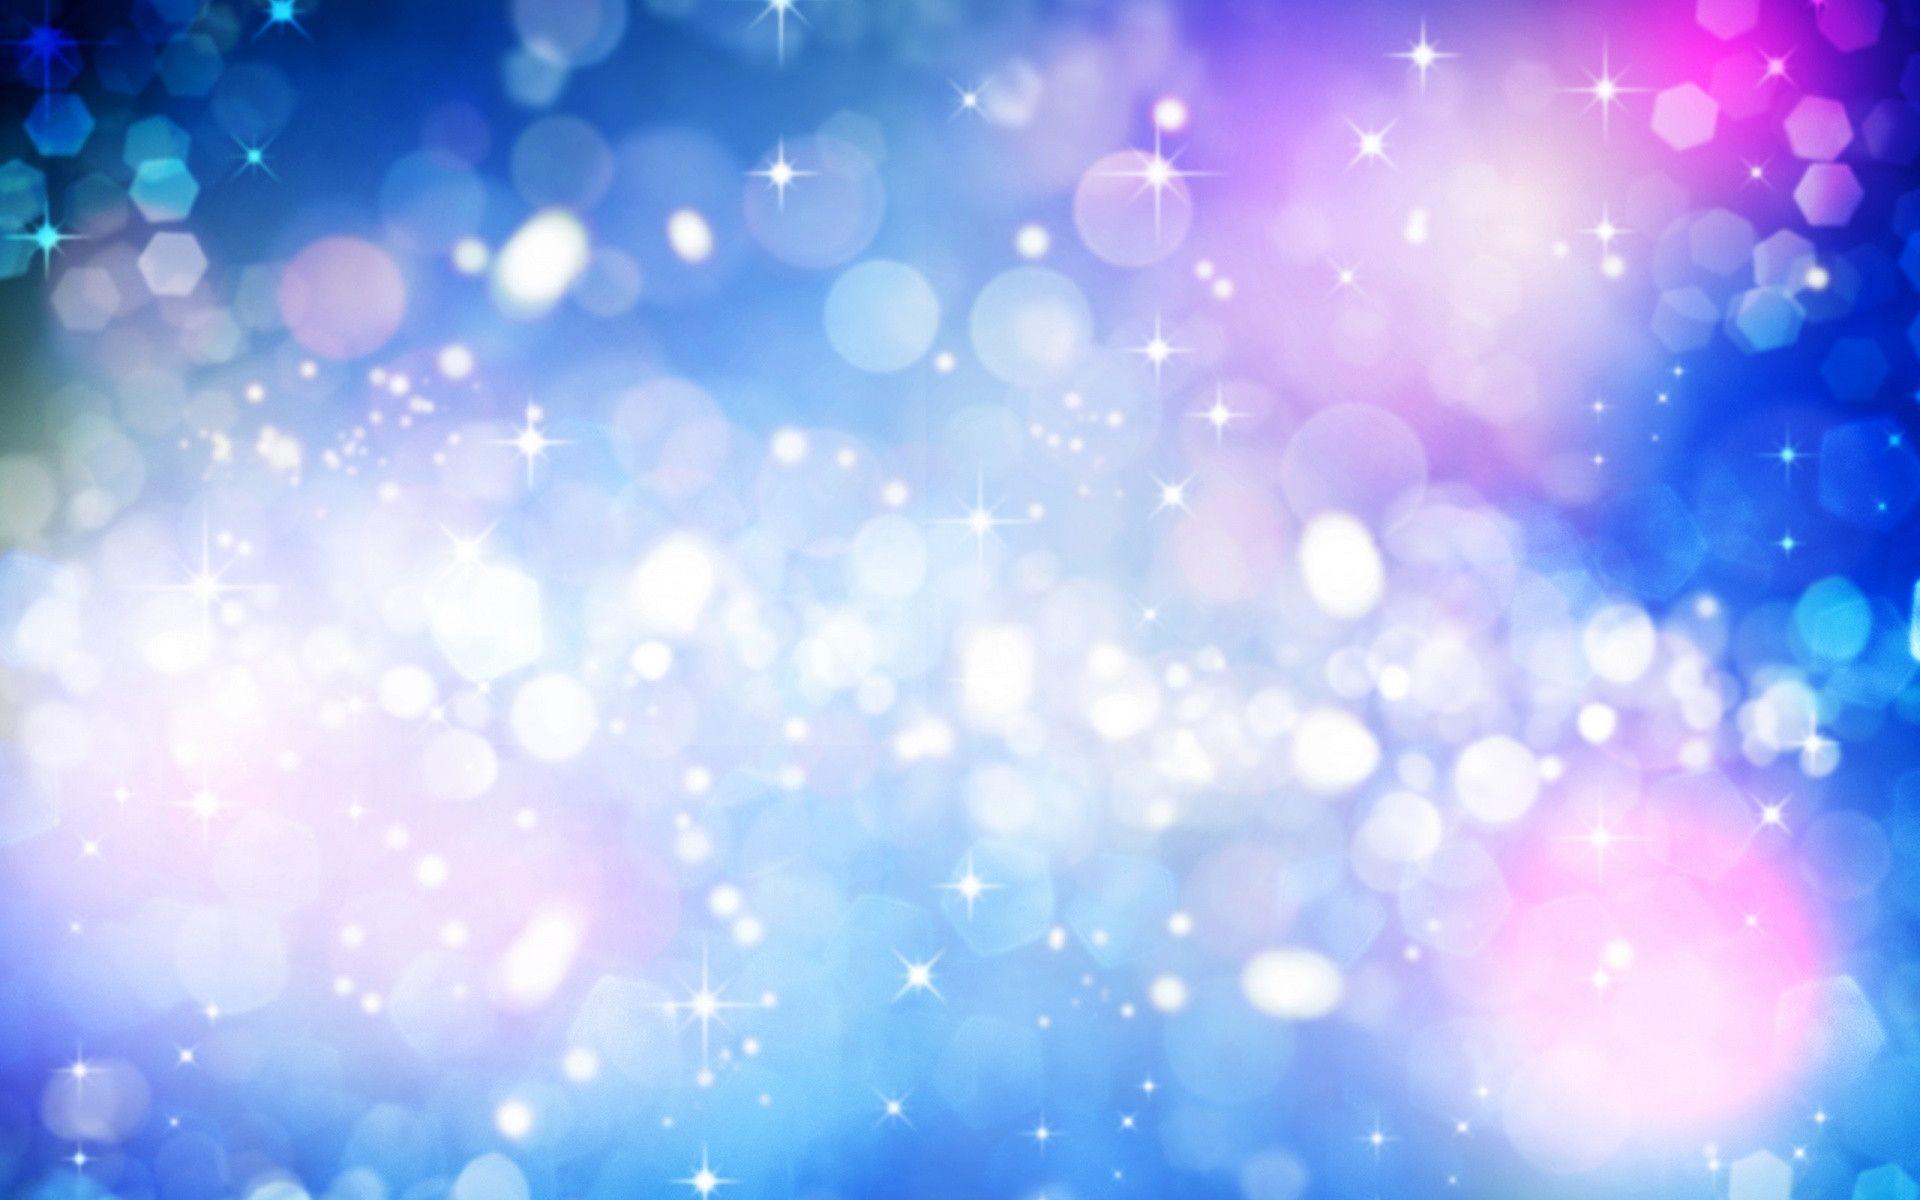 Abstract Wallpaper: Exciting Sparkling Circles and Stars Background